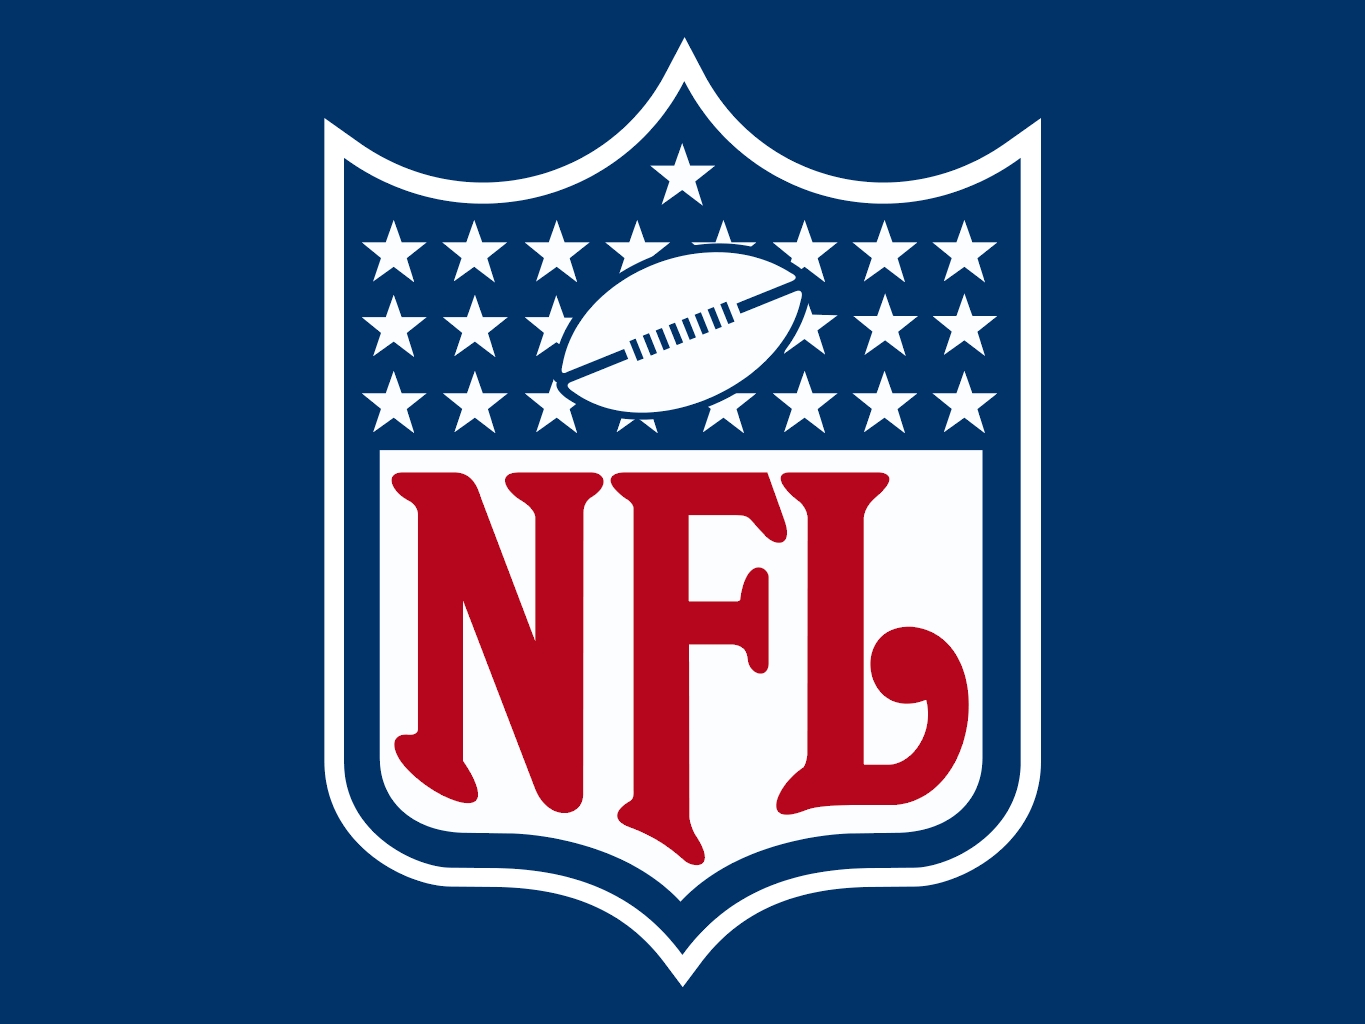 The NFL GamePass has launched in the US